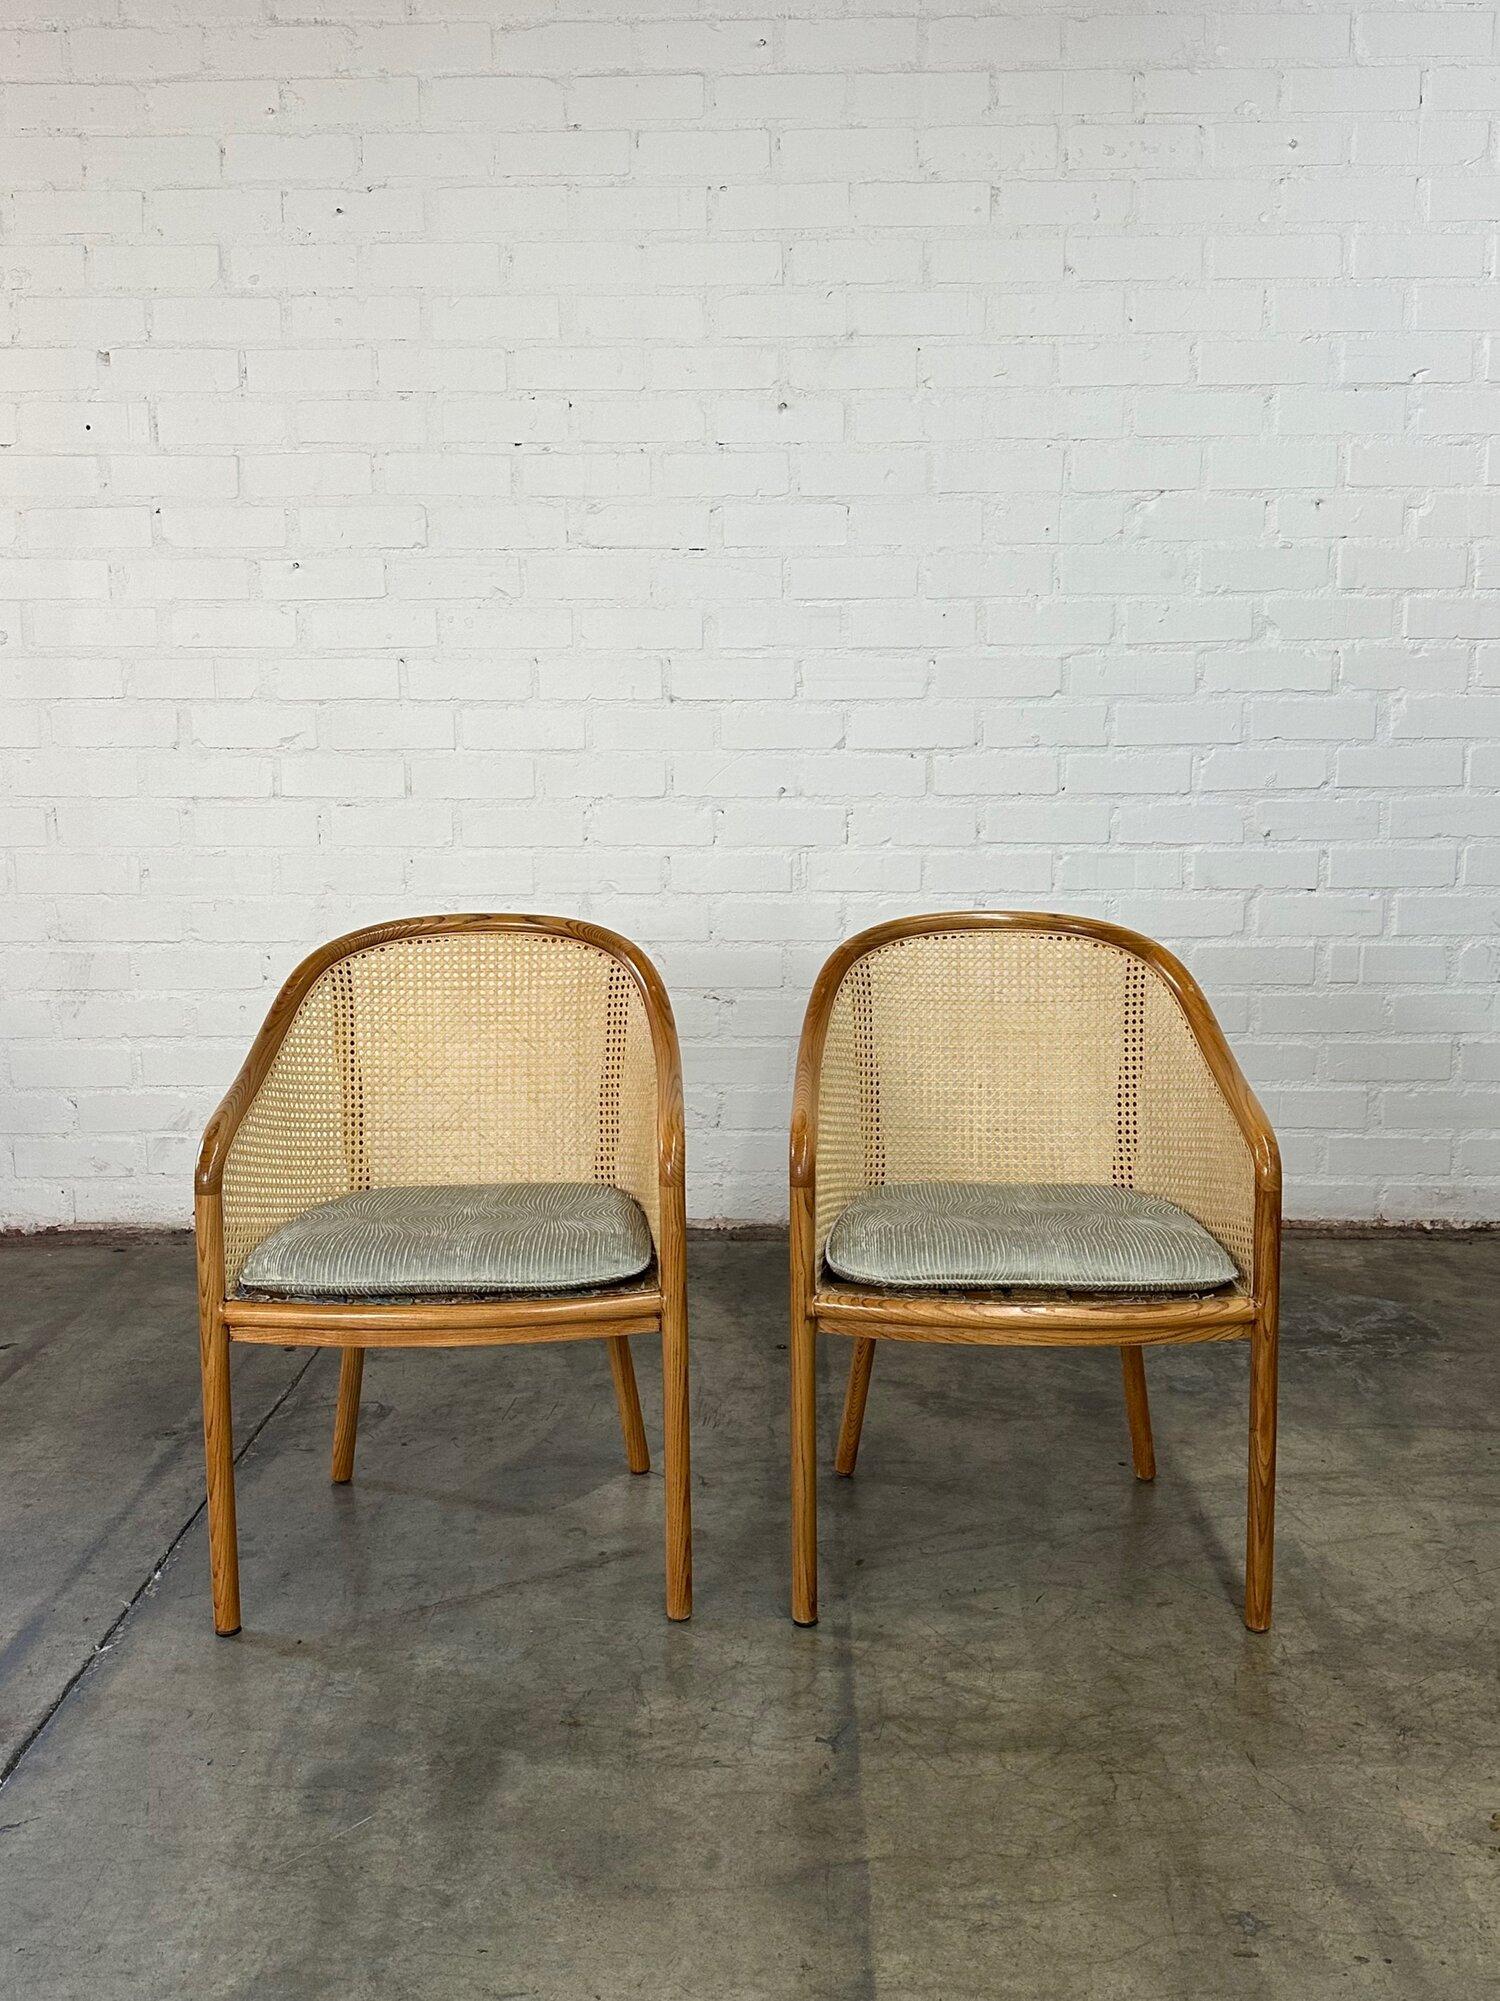 Cane side chairs by Ward Bennet -pair 2